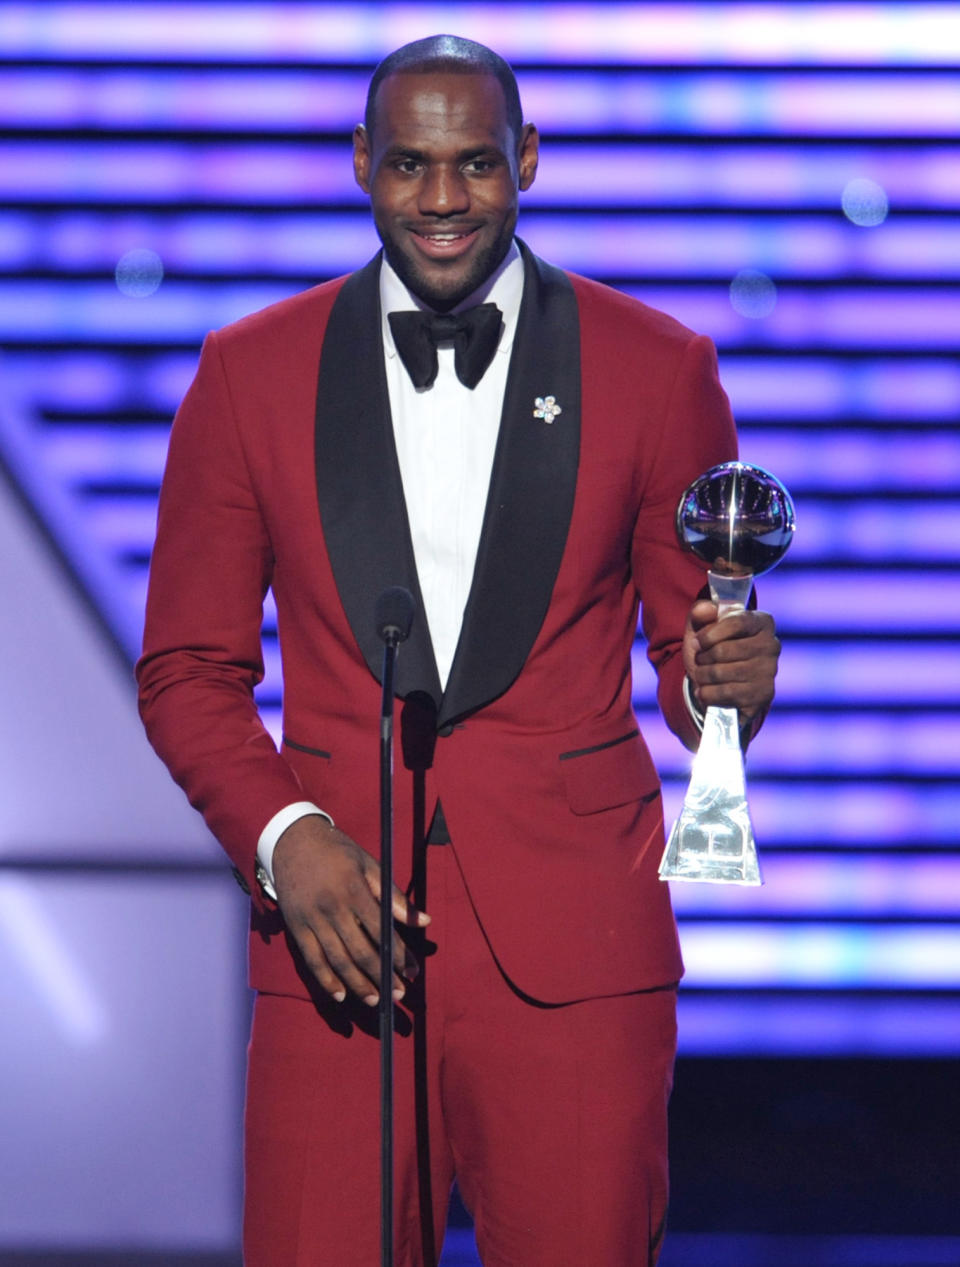 FILE - In this July 17, 2013 file photo, LeBron James accepts the award for best male athlete at the ESPY Awards at Nokia Theater, in Los Angeles. James is joining forces with Starz and the man behind classic shows like “The Cosby Show” to create a sitcom that will touch on something he knows a lot about _ “Survivor’s Remorse.” (Photo by John Shearer/Invision/AP, File)